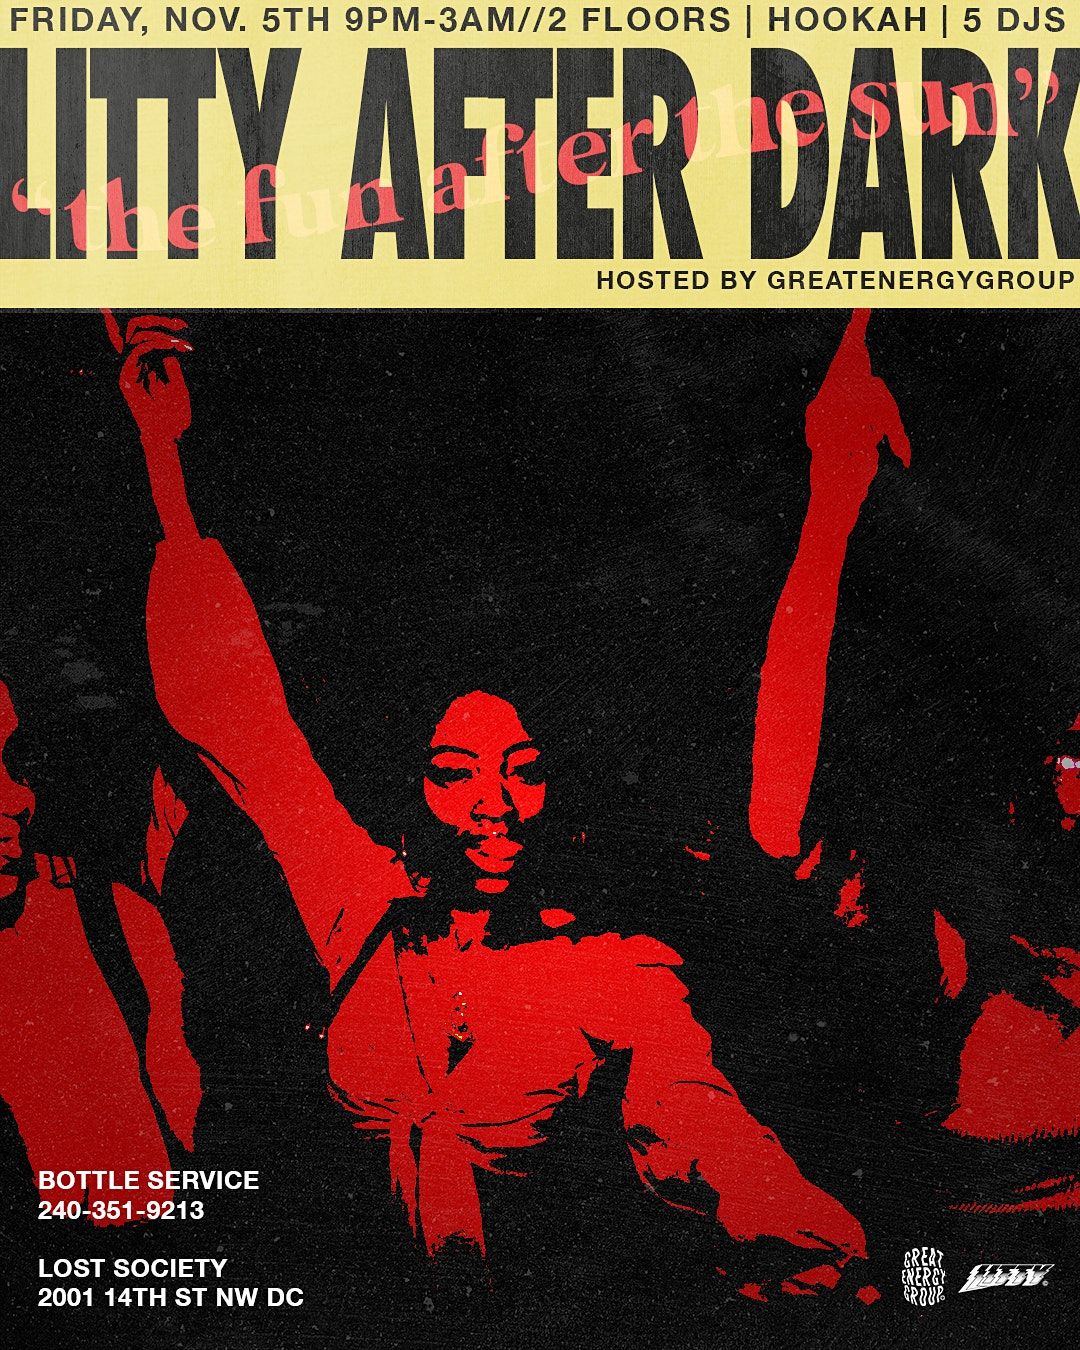 LITTY AFTER DARK: The Fun After The Sun